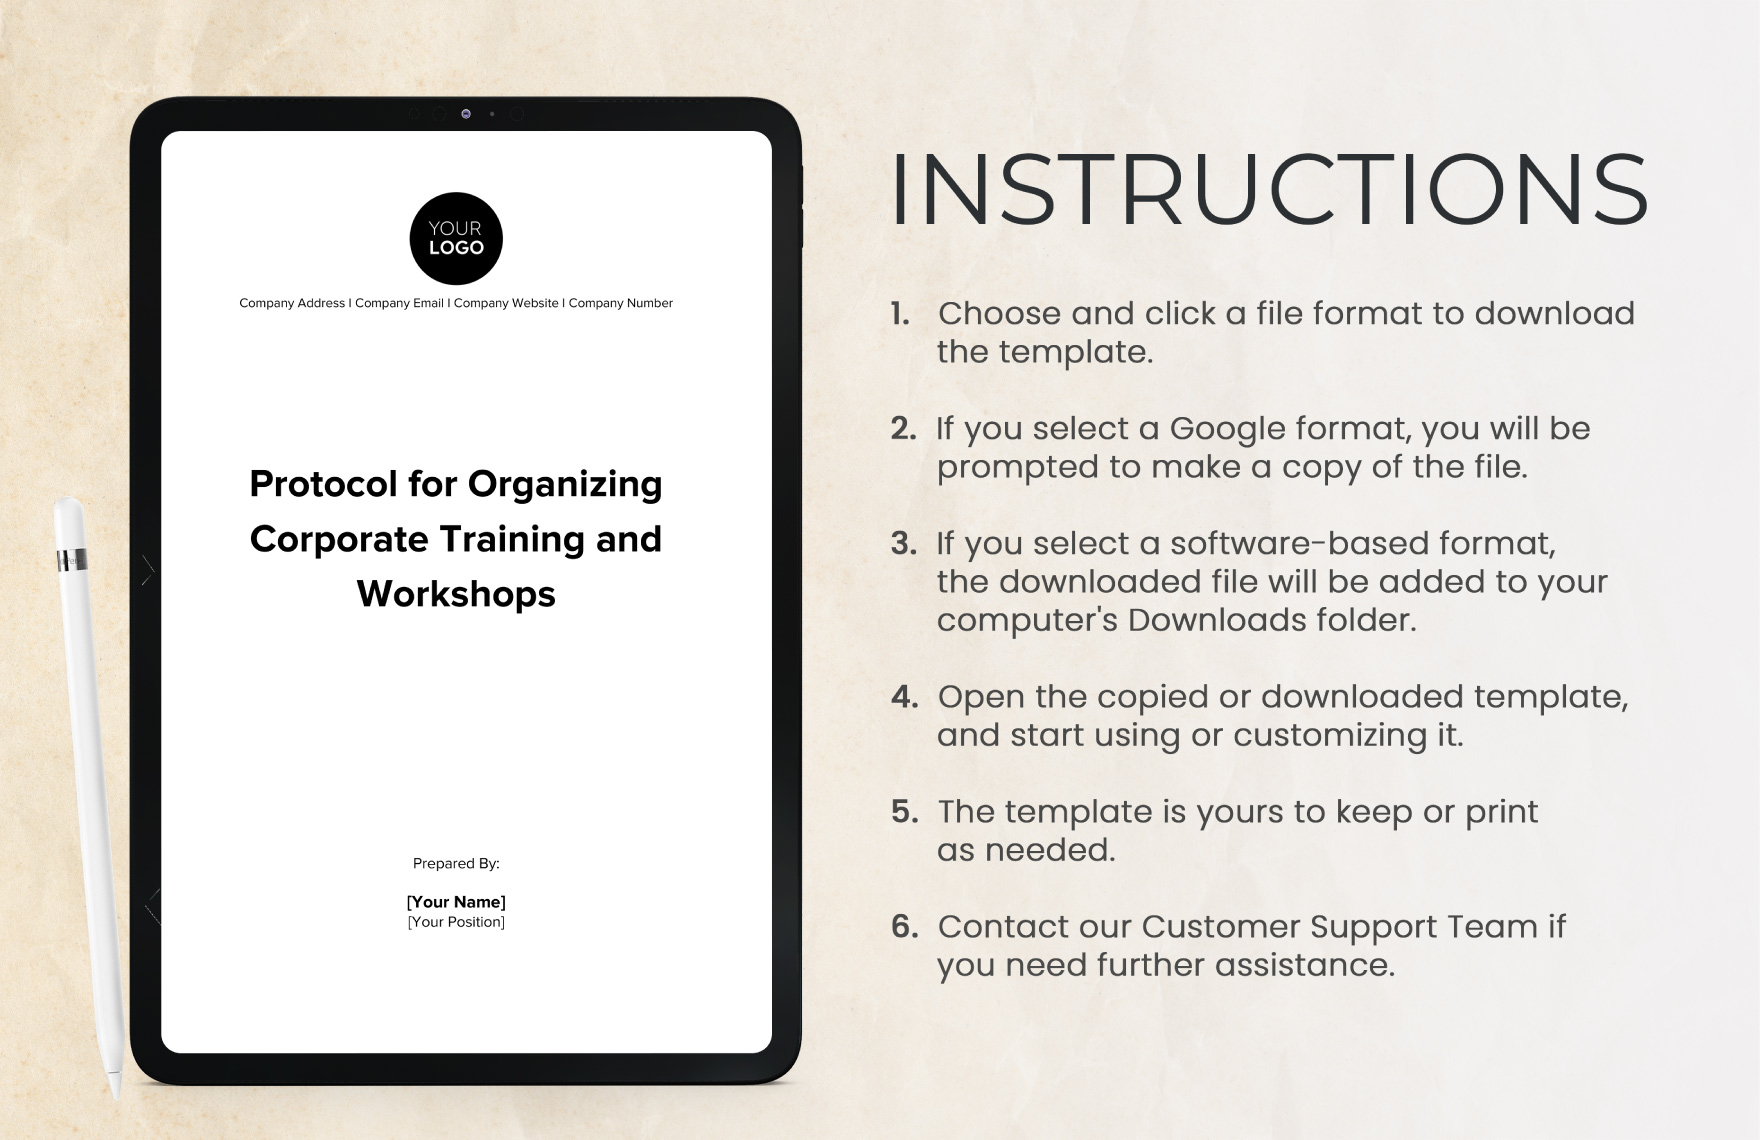 Protocol for Organizing Corporate Training and Workshops HR Template